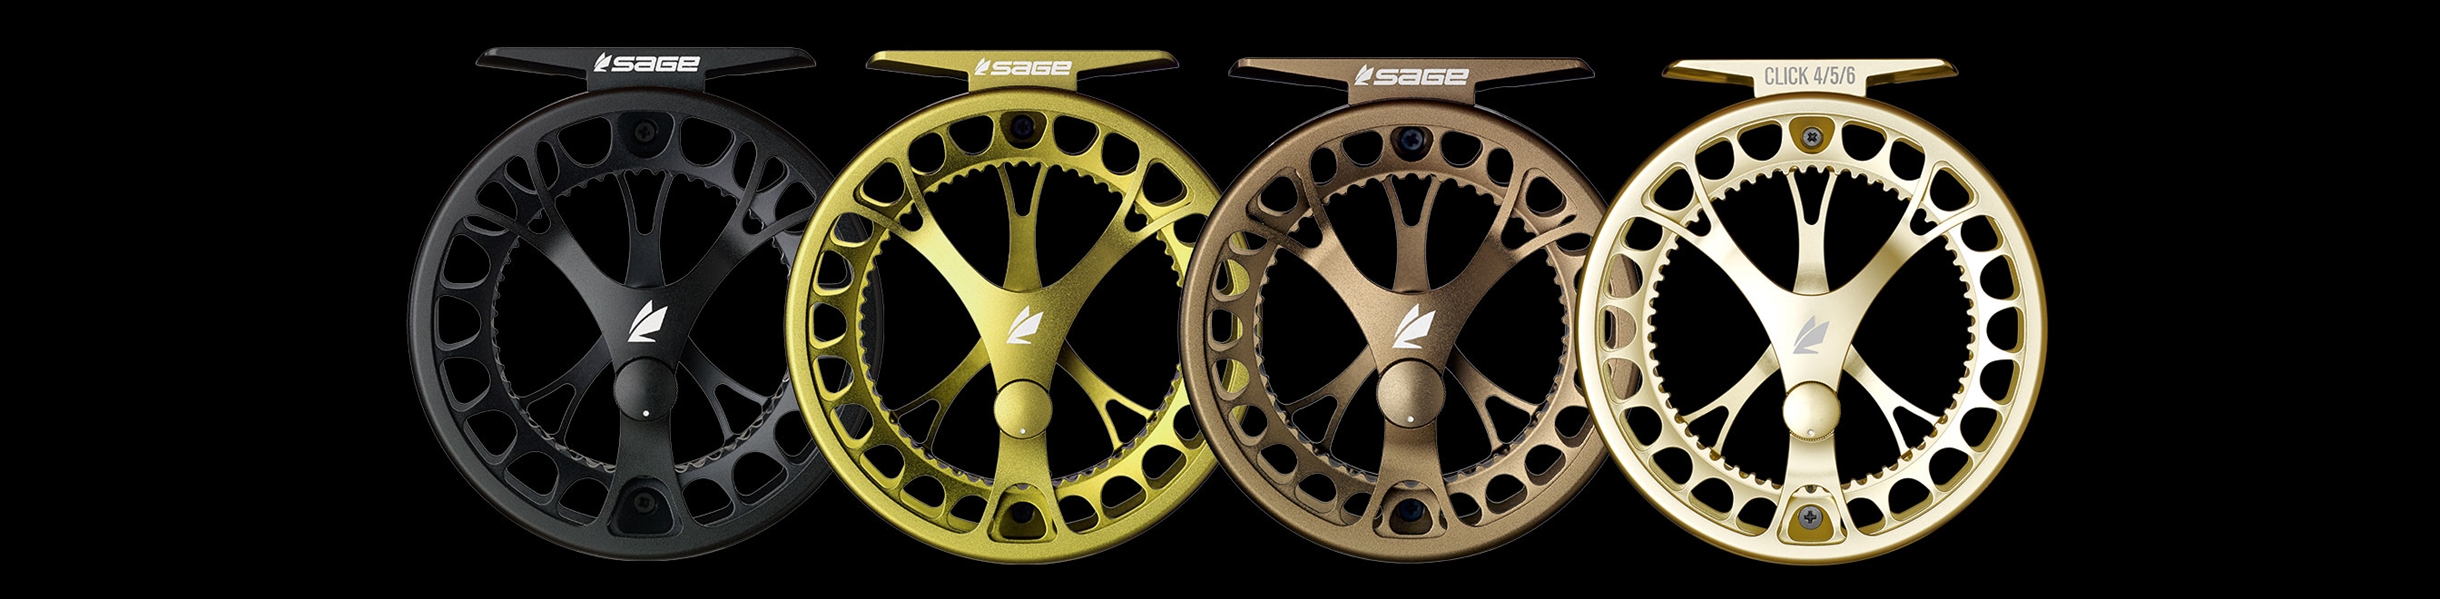 Sage Click Fly Reel – Guide Flyfishing, Fly Fishing Rods, Reels, Sage, Redington, RIO